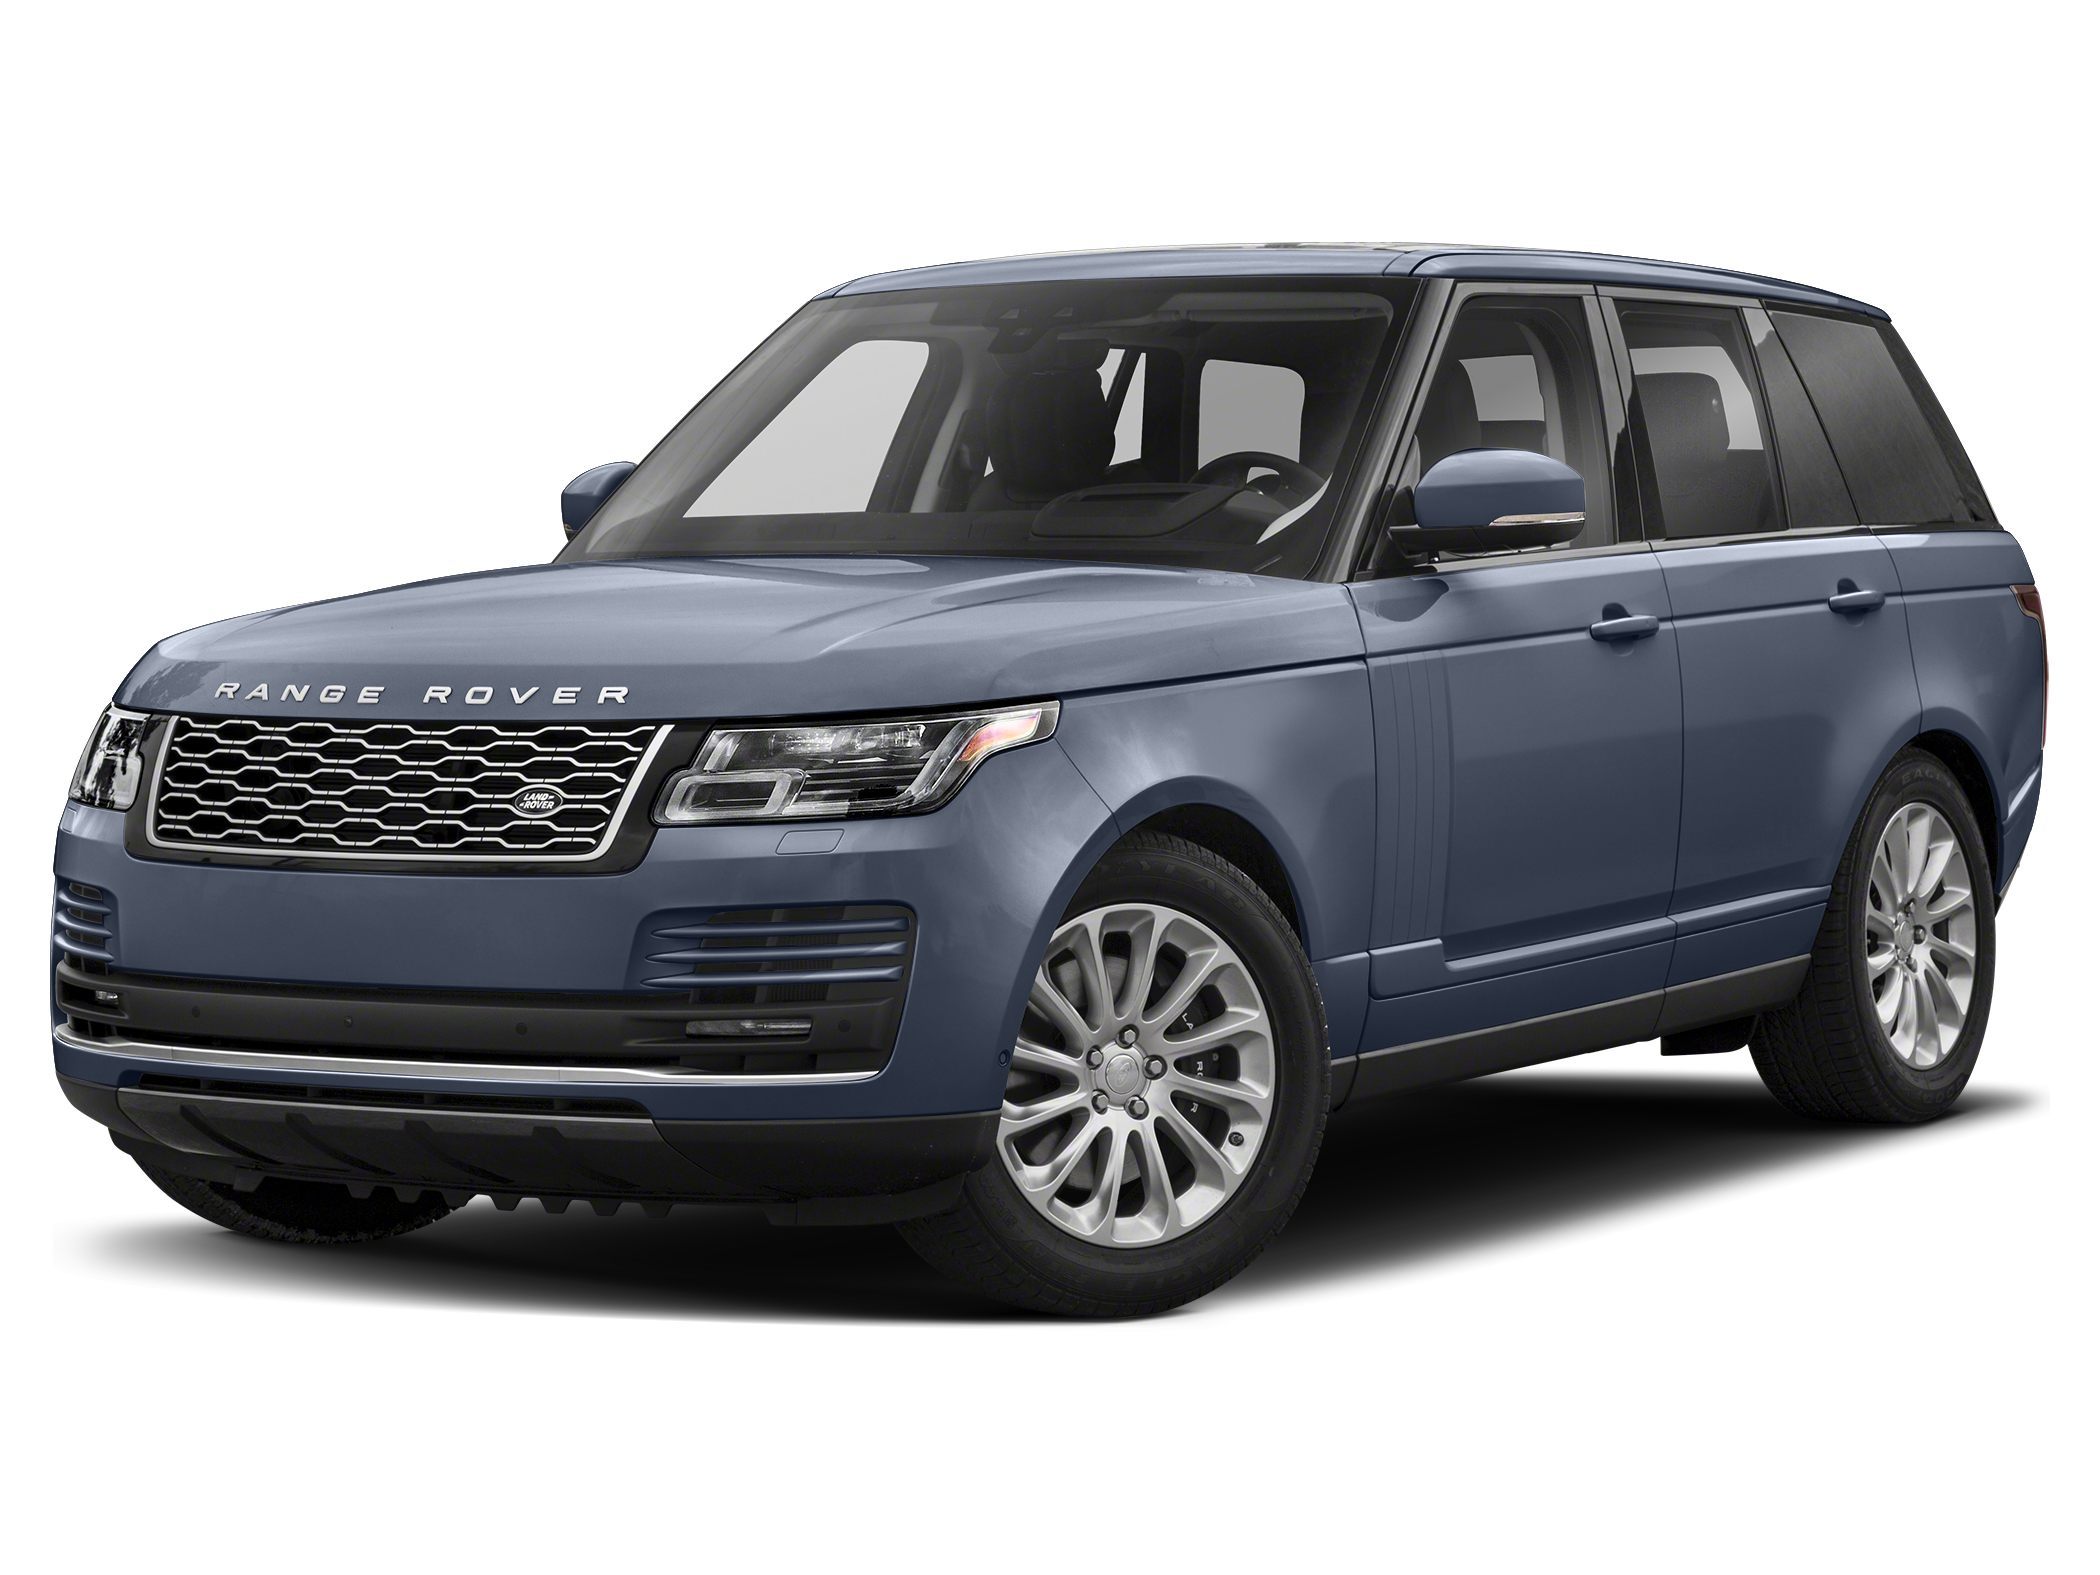 2021 Land Rover Range Rover for Sale in Lowell, MA CarGurus